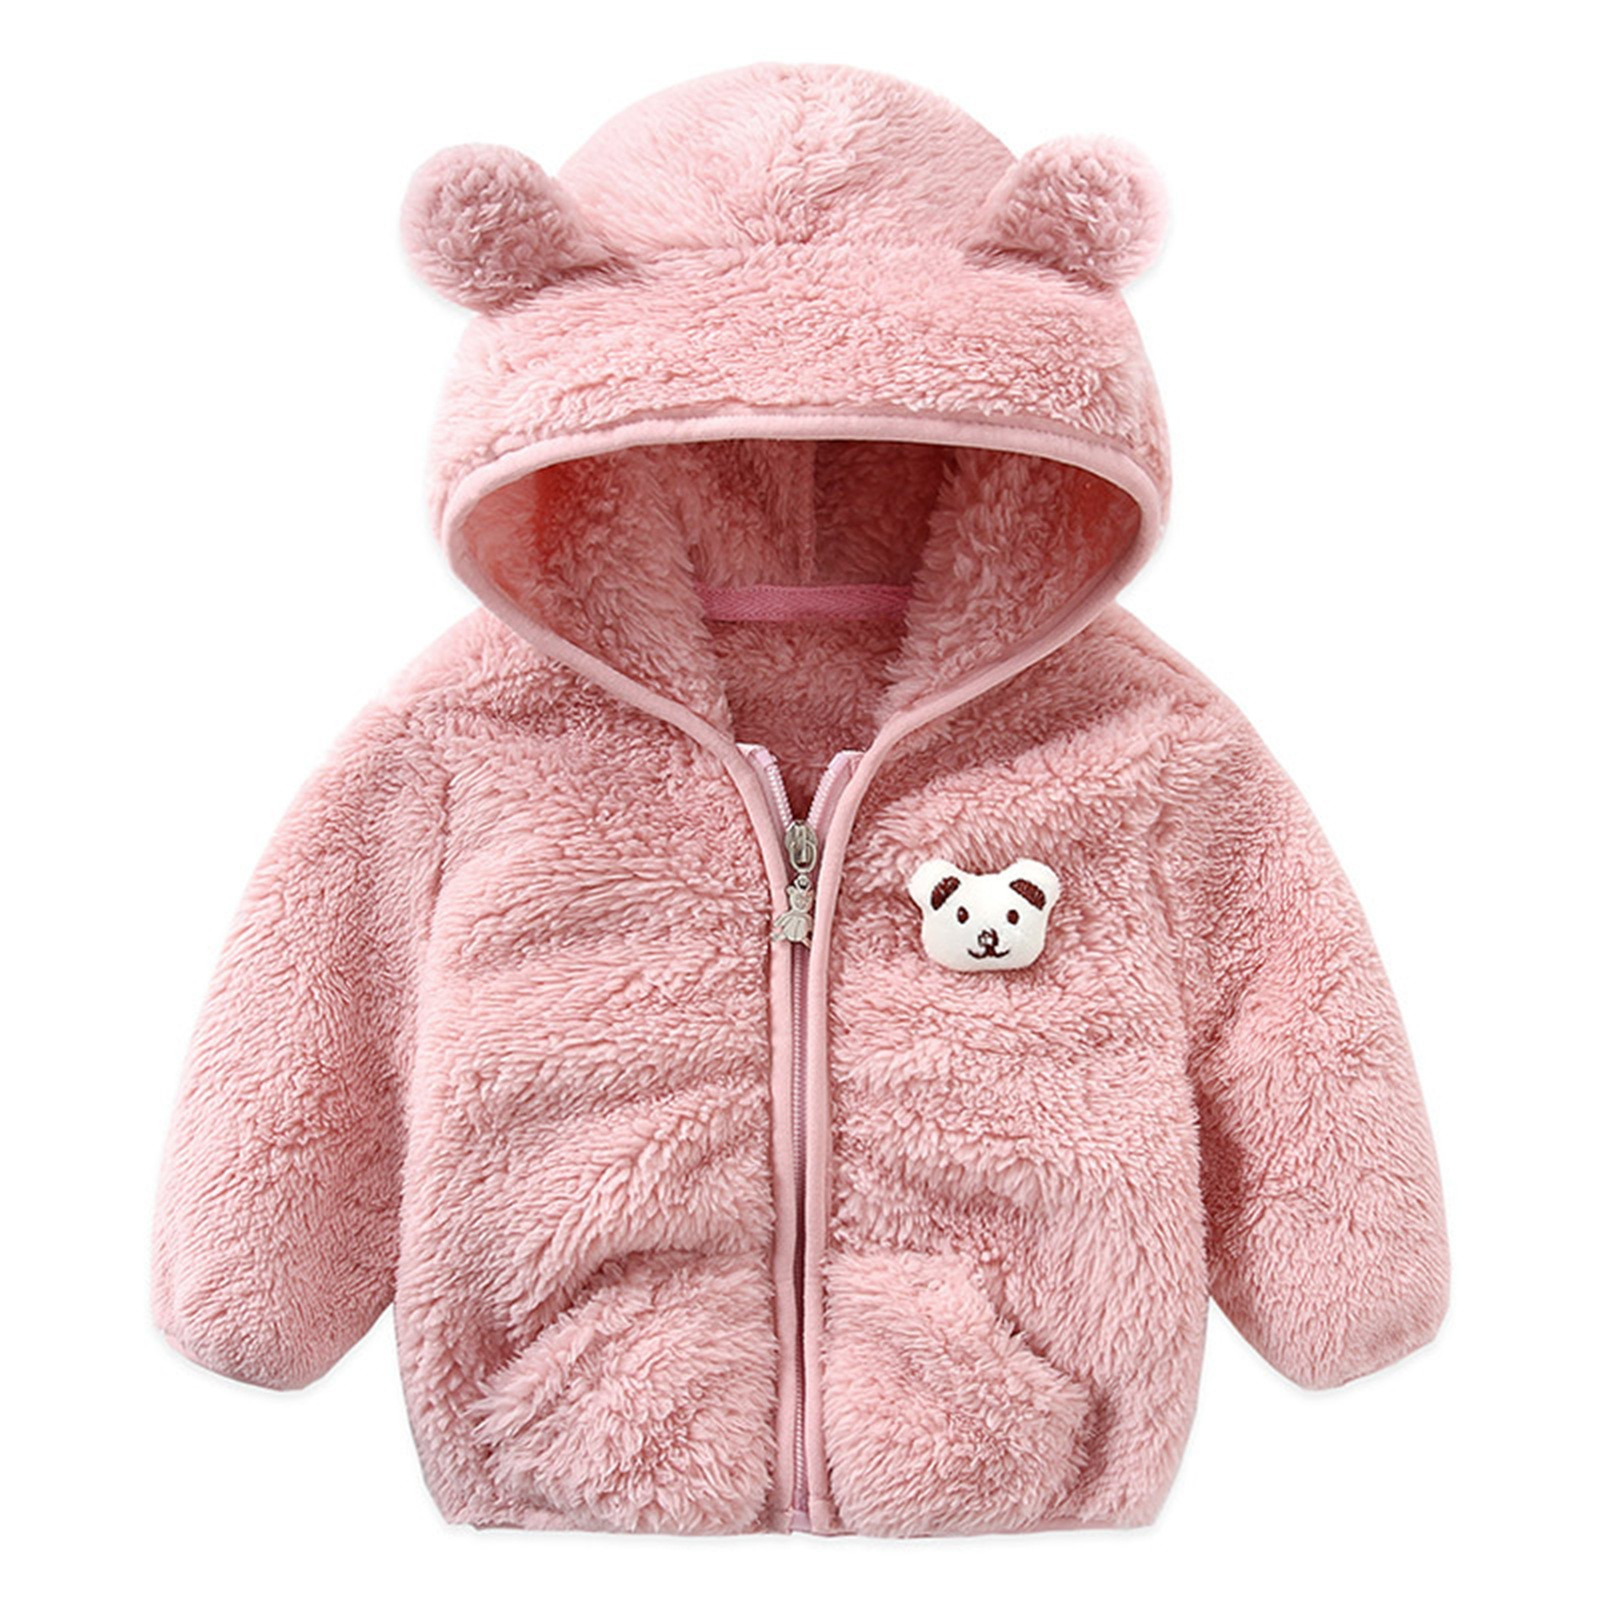 Dinosaur Jacket Toddler Baby Boy Girl Jacket Winter Clothes Hooded Coat Tops With Bear Ears Pants Sweater 2PCS Outfits Set Wool Trench Coat Boys - image 4 of 9